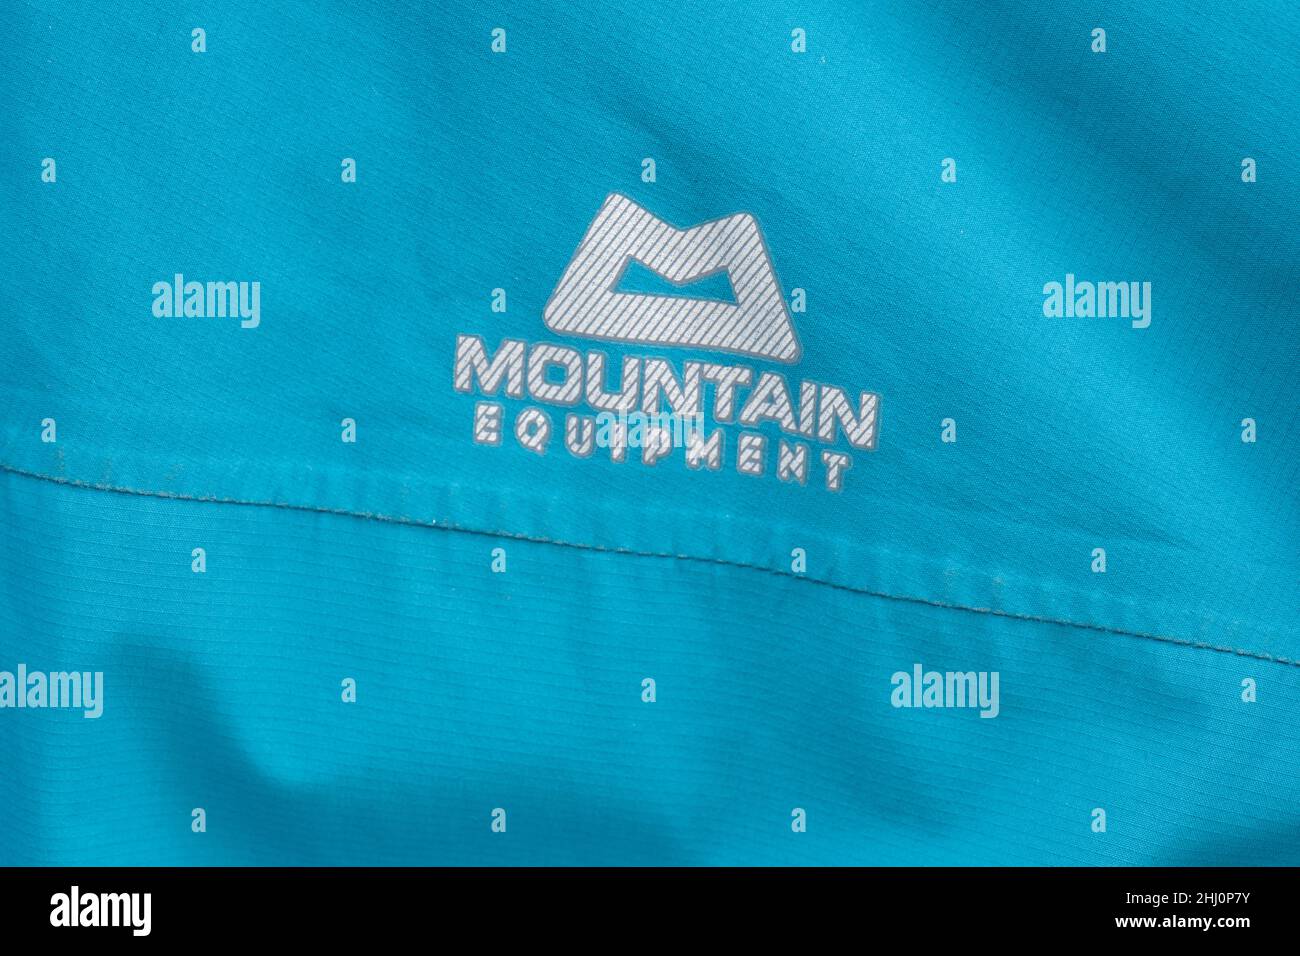 Mountain Equipment outdoor clothing brand on waterproof (gore-tex) jacket Stock Photo